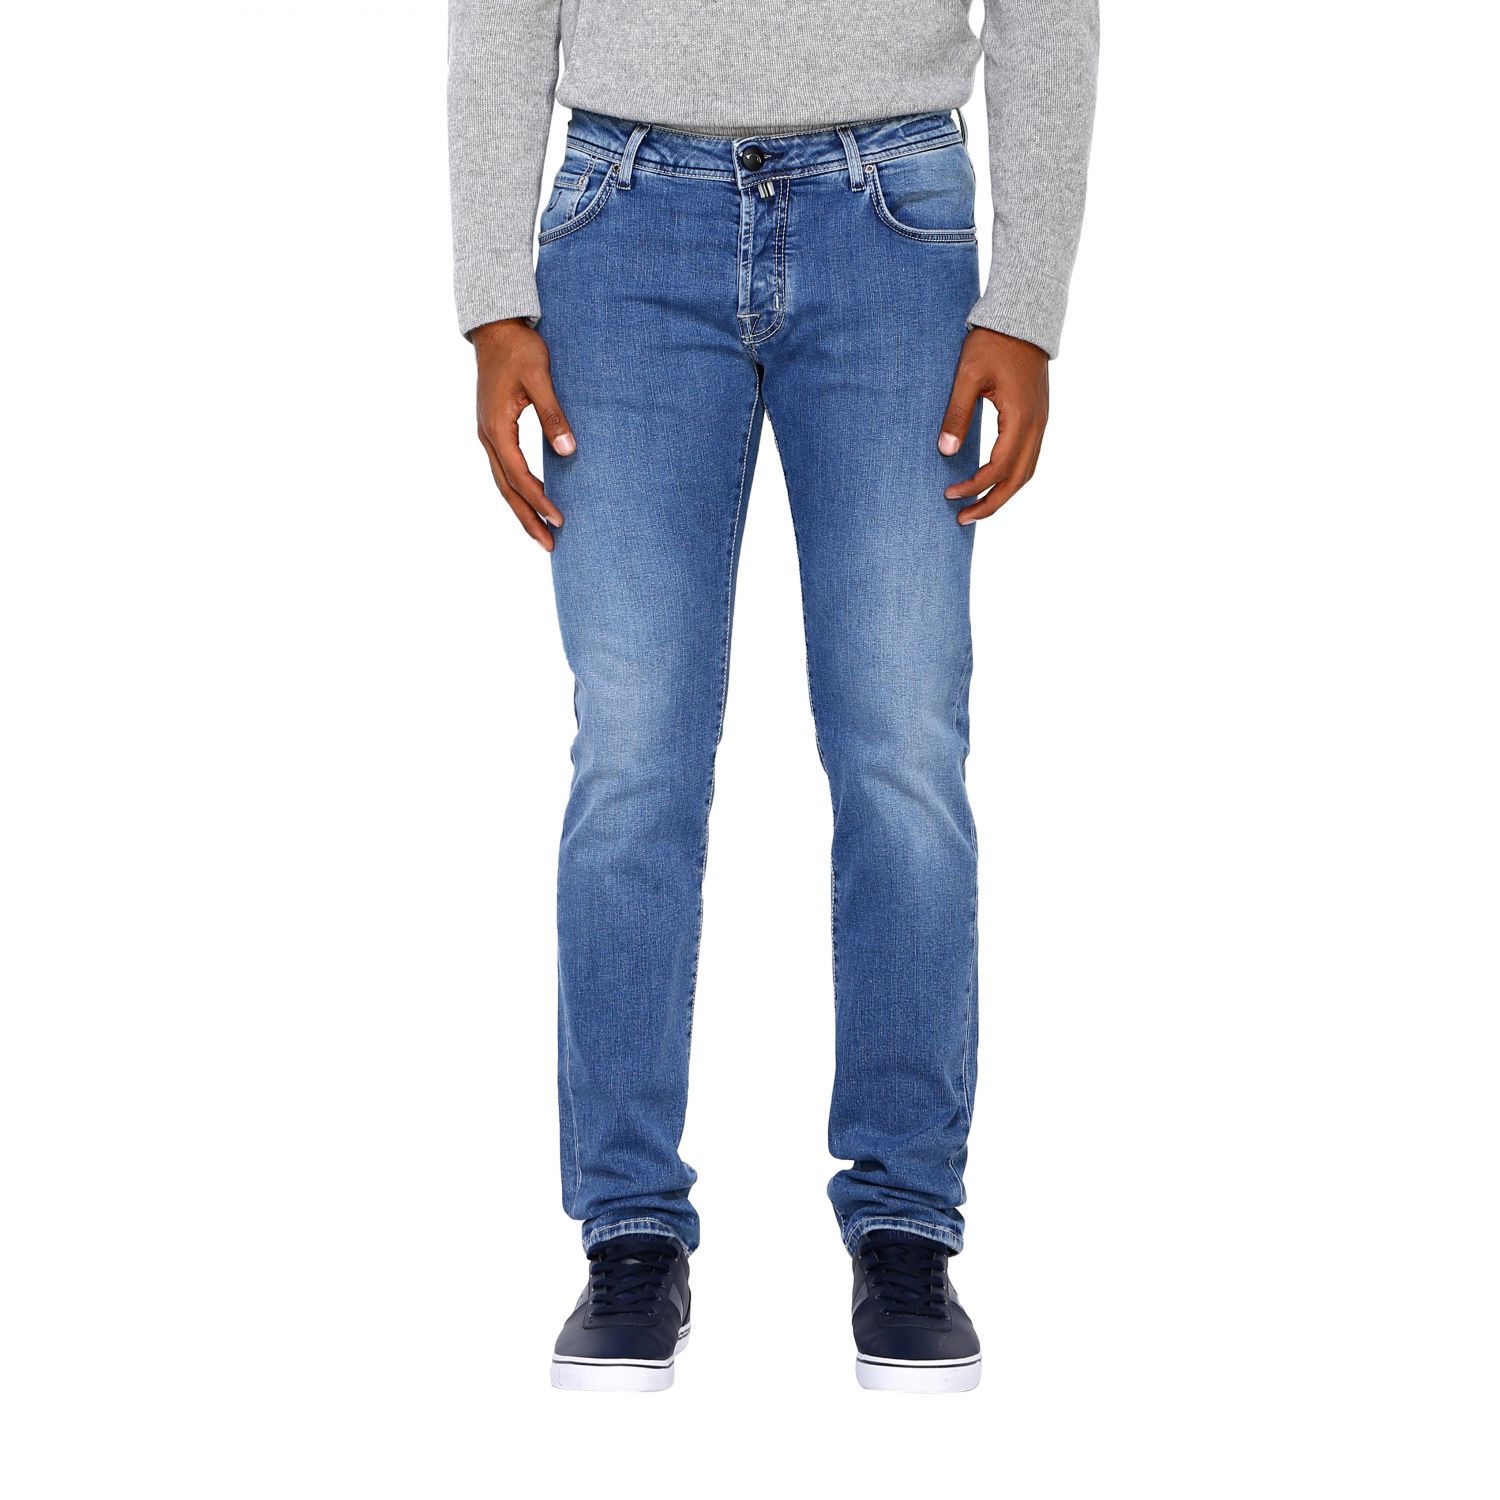 Disappointed Pleated wise Jacob Cohen Outlet: Jeans men | Jeans Jacob Cohen Men Denim | Jeans Jacob  Cohen J622 SLIM COMF 01133 W3 GIGLIO.COM